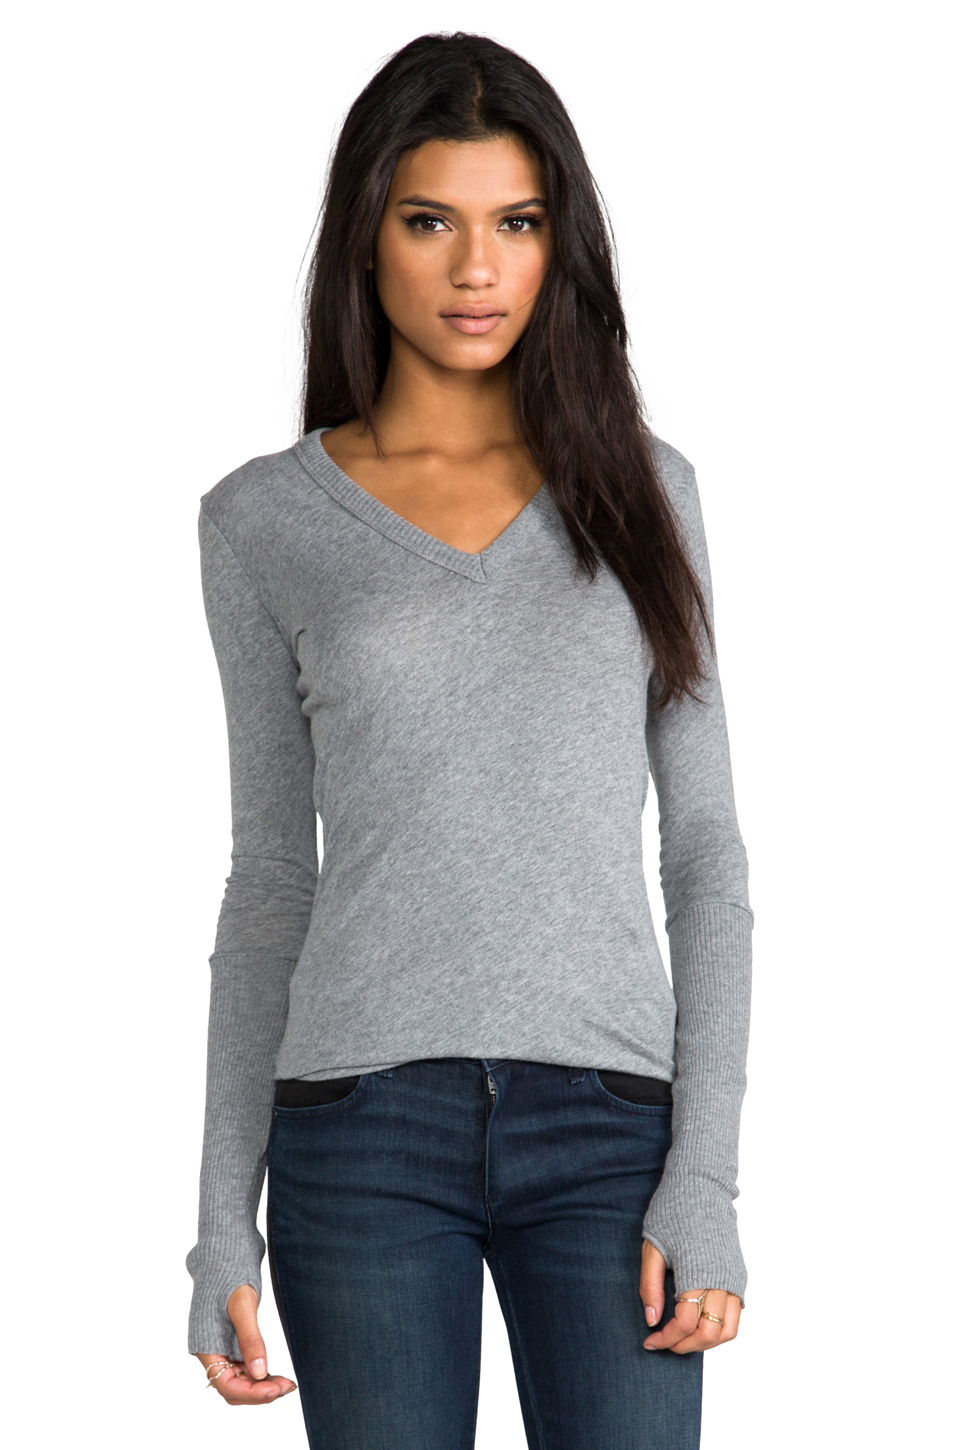 Lyst - Enza costa Cashmere Fitted Cuffed V Neck Sweater in Gray in Gray